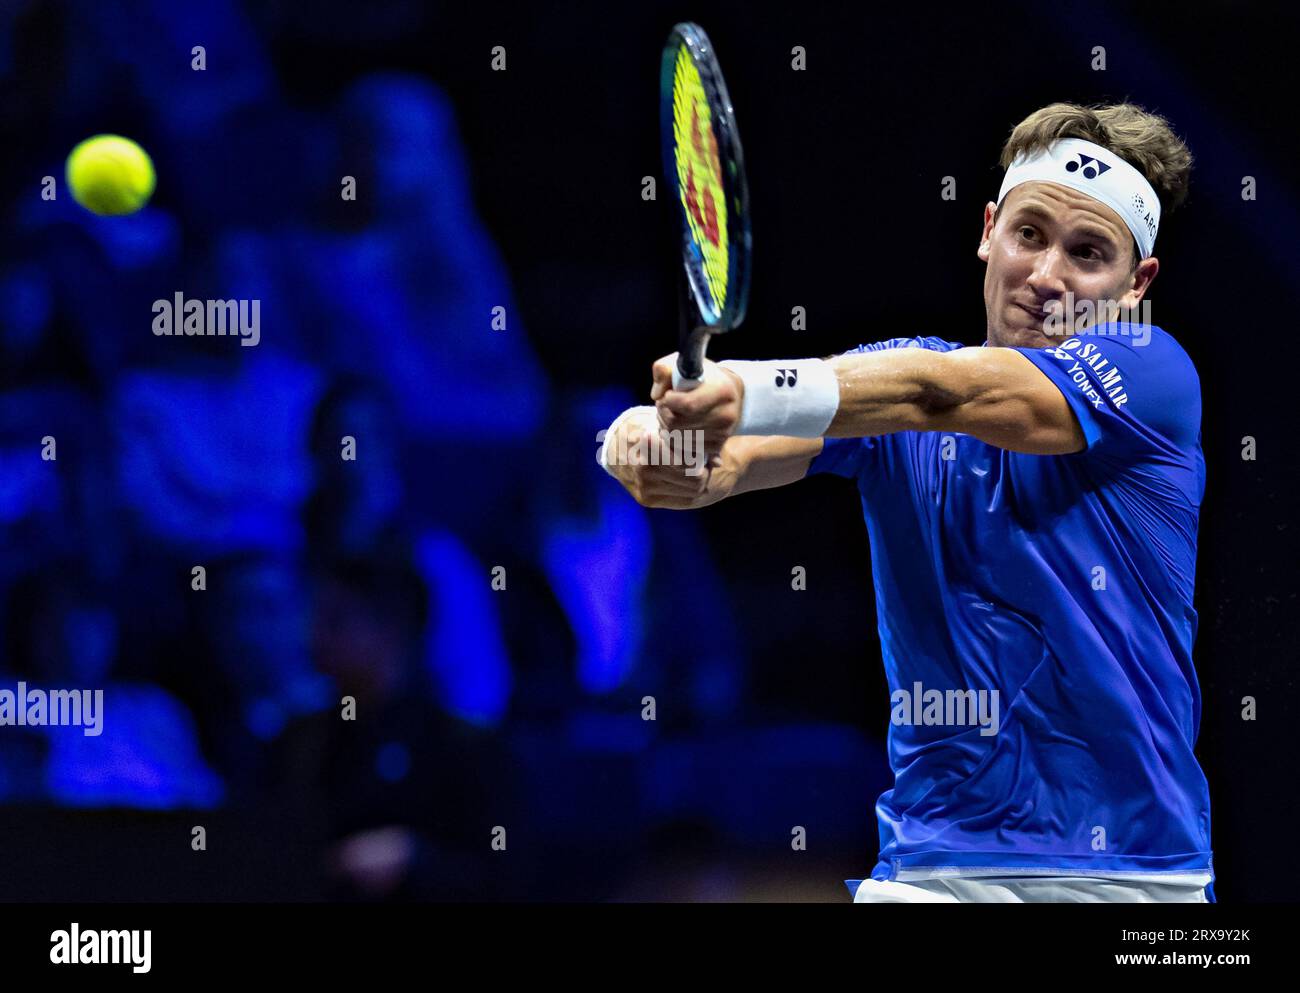 Vancouver, Canada. 23rd Sep, 2023. Casper Rudd of Team Europe returns the ball to Tommy Paul of Team World at the Laver Cup between Team Europe and Team World in Vancouver, Canada, on Sept. 23, 2023. Credit: Andrew Soong/Xinhua/Alamy Live News Stock Photo